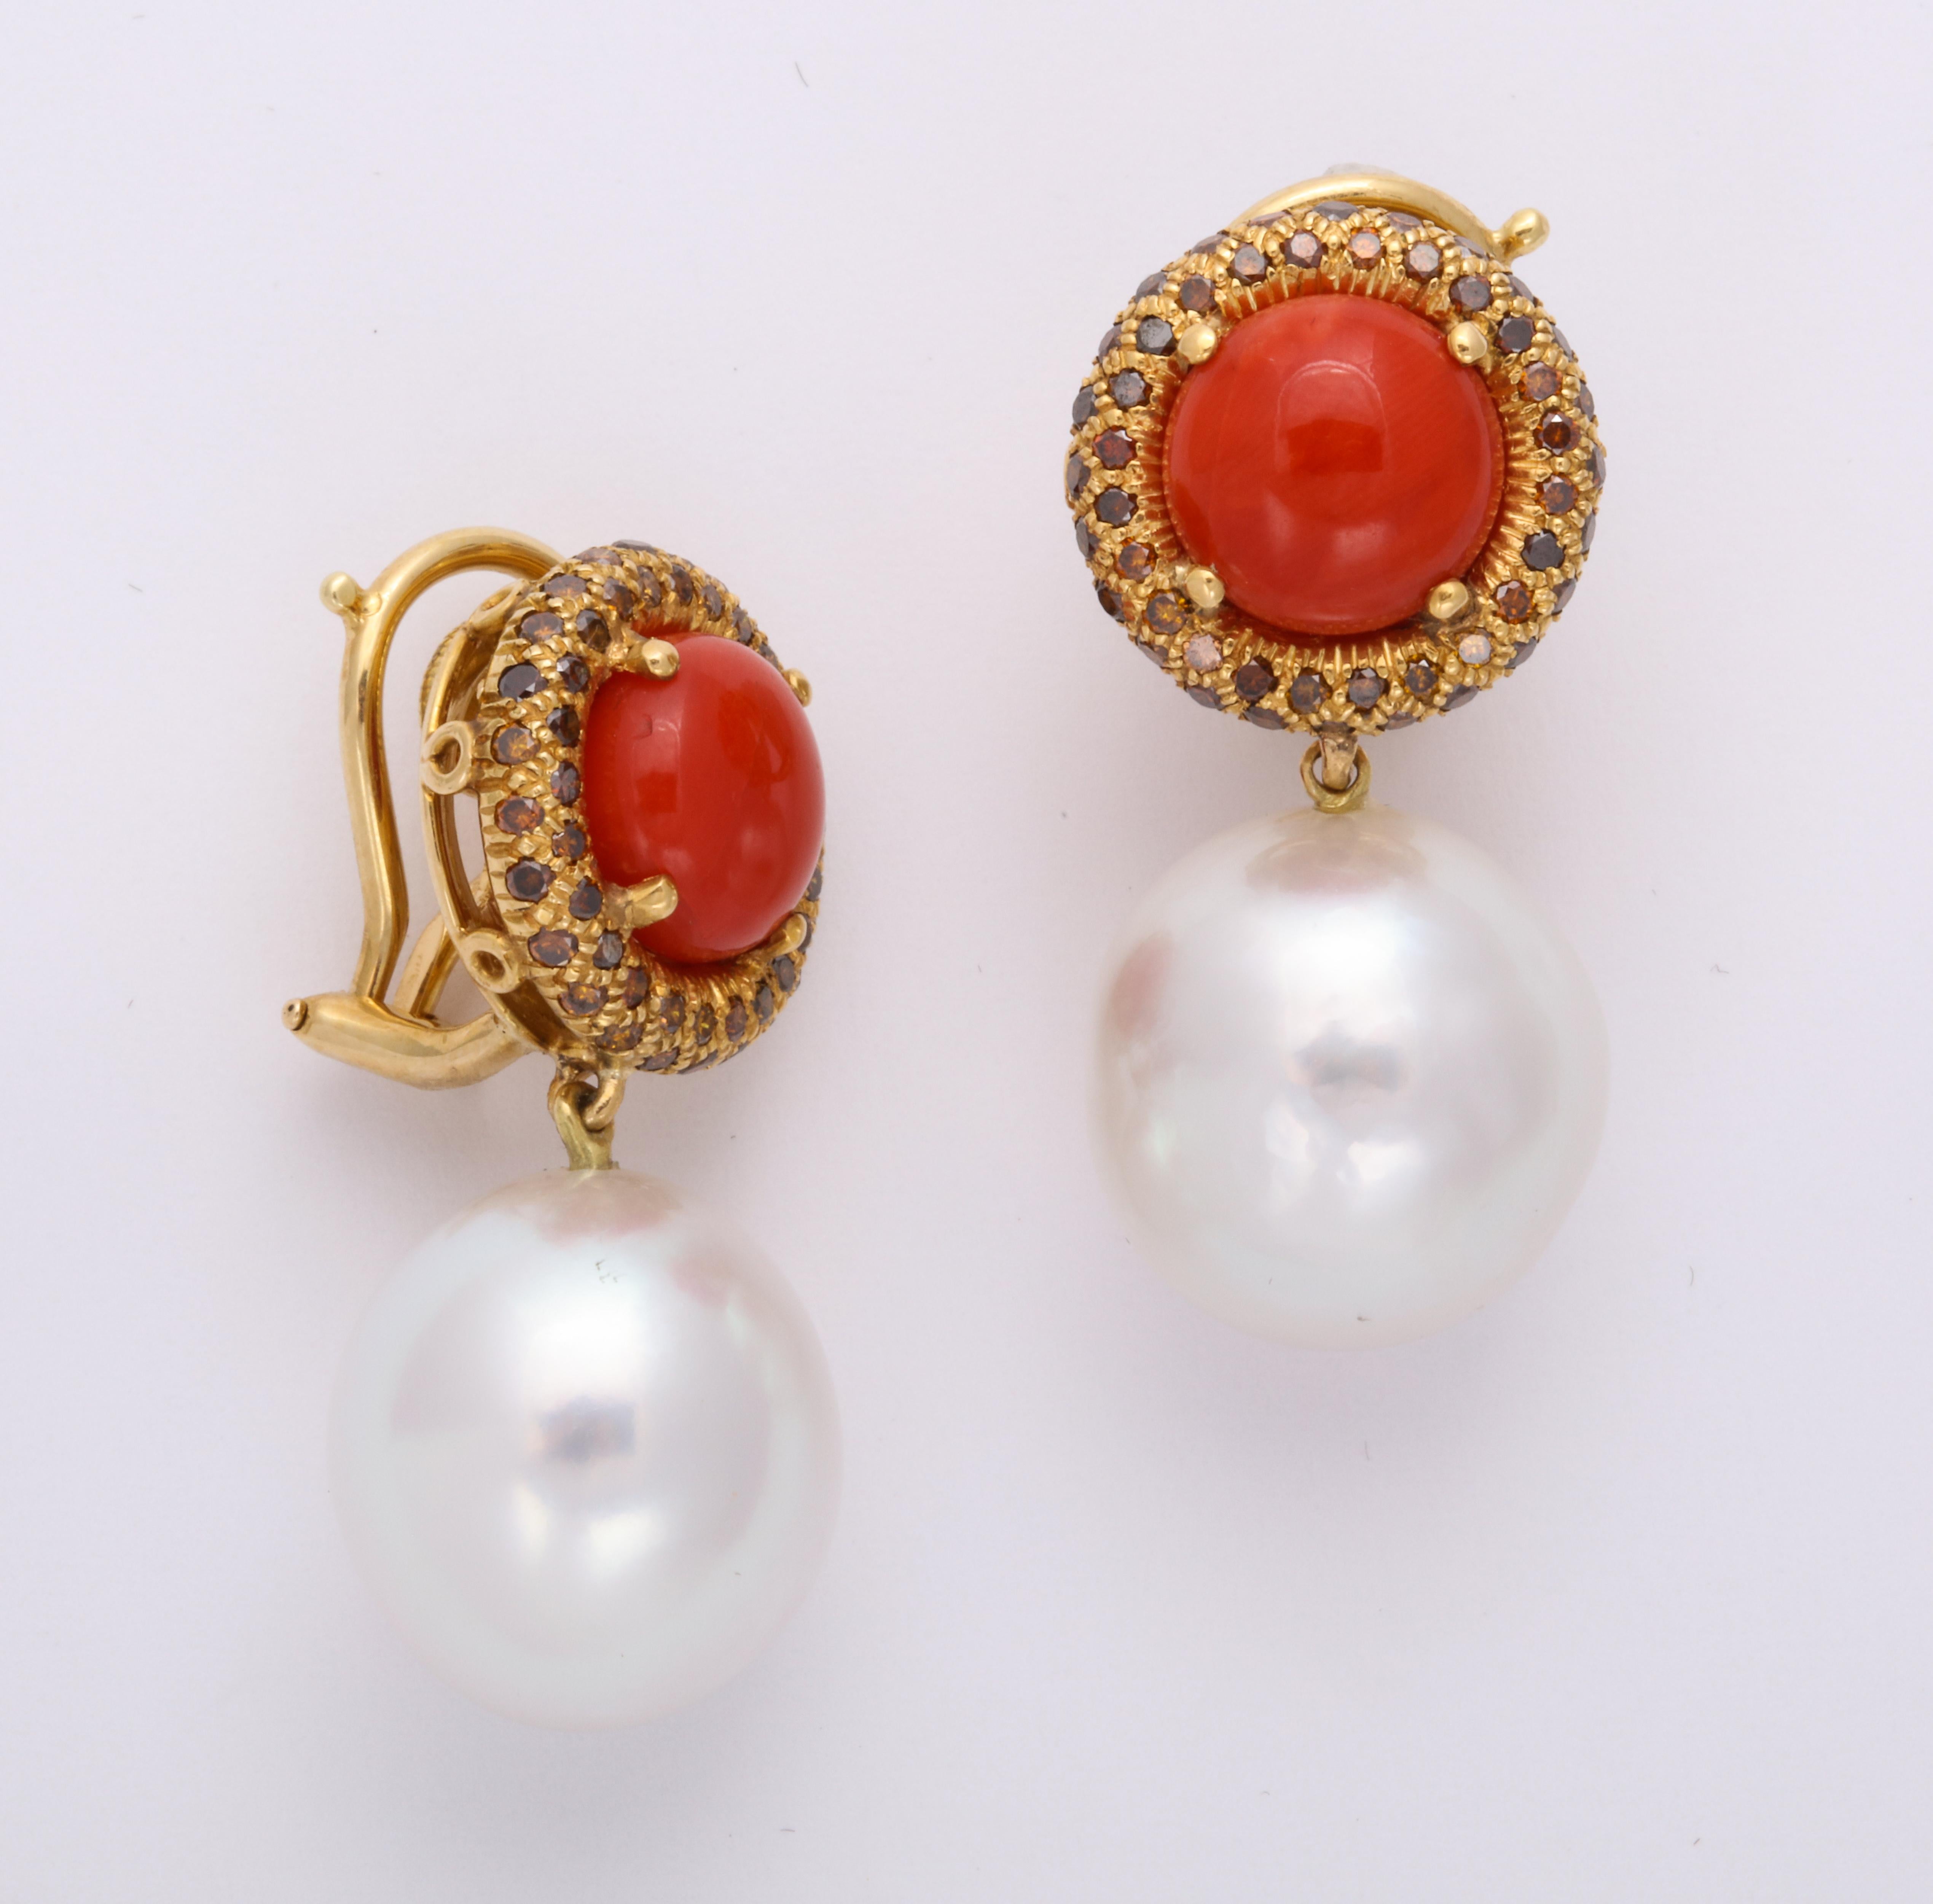 A classic Donna Vock design, this clip-on earring features high quality natural color (not dyed) red coral surrounded by 1.75 carats of natural color brown diamonds in a pretty shade of cognac, all pave set in 18K yellow gold.  The earring has a